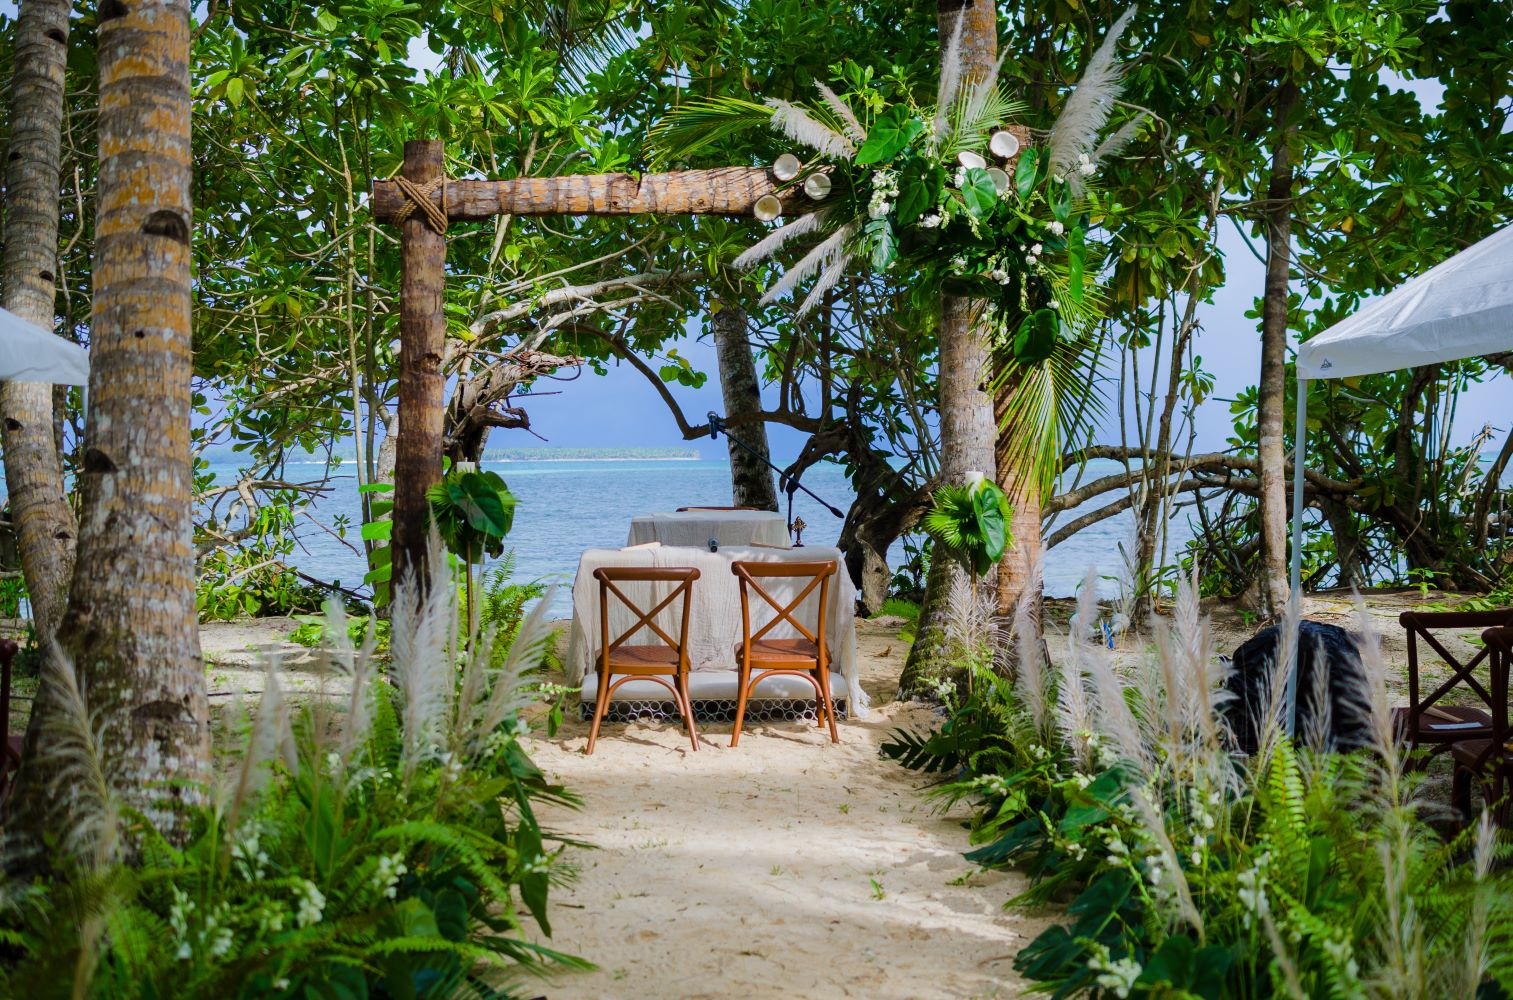 Say your vows by the sea in the quintessential beach garden setting in Siargao Island